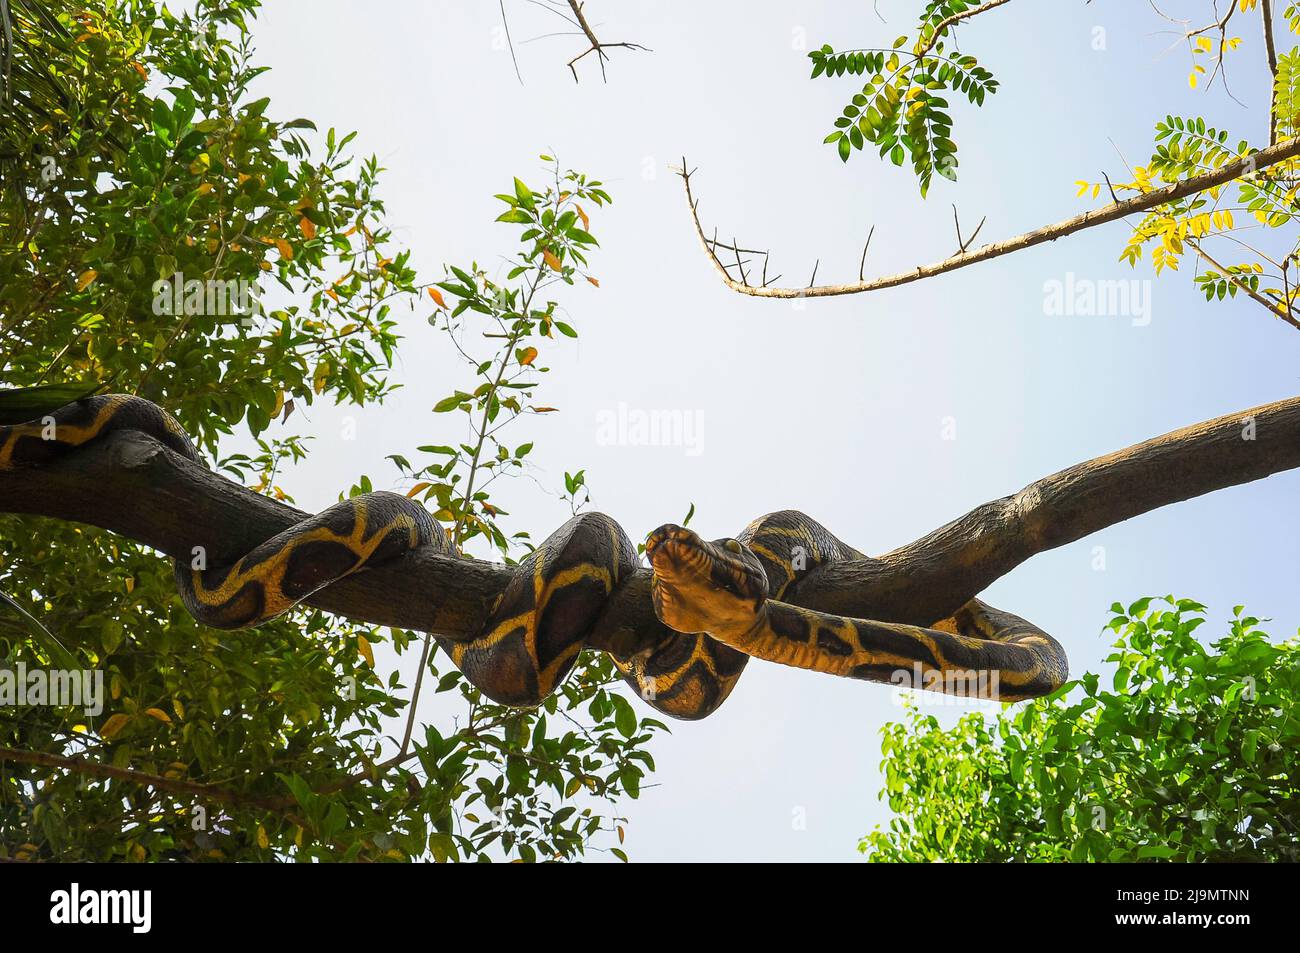 A snake mummy wrapped around a tree branch in Goa, India. Stock Photo